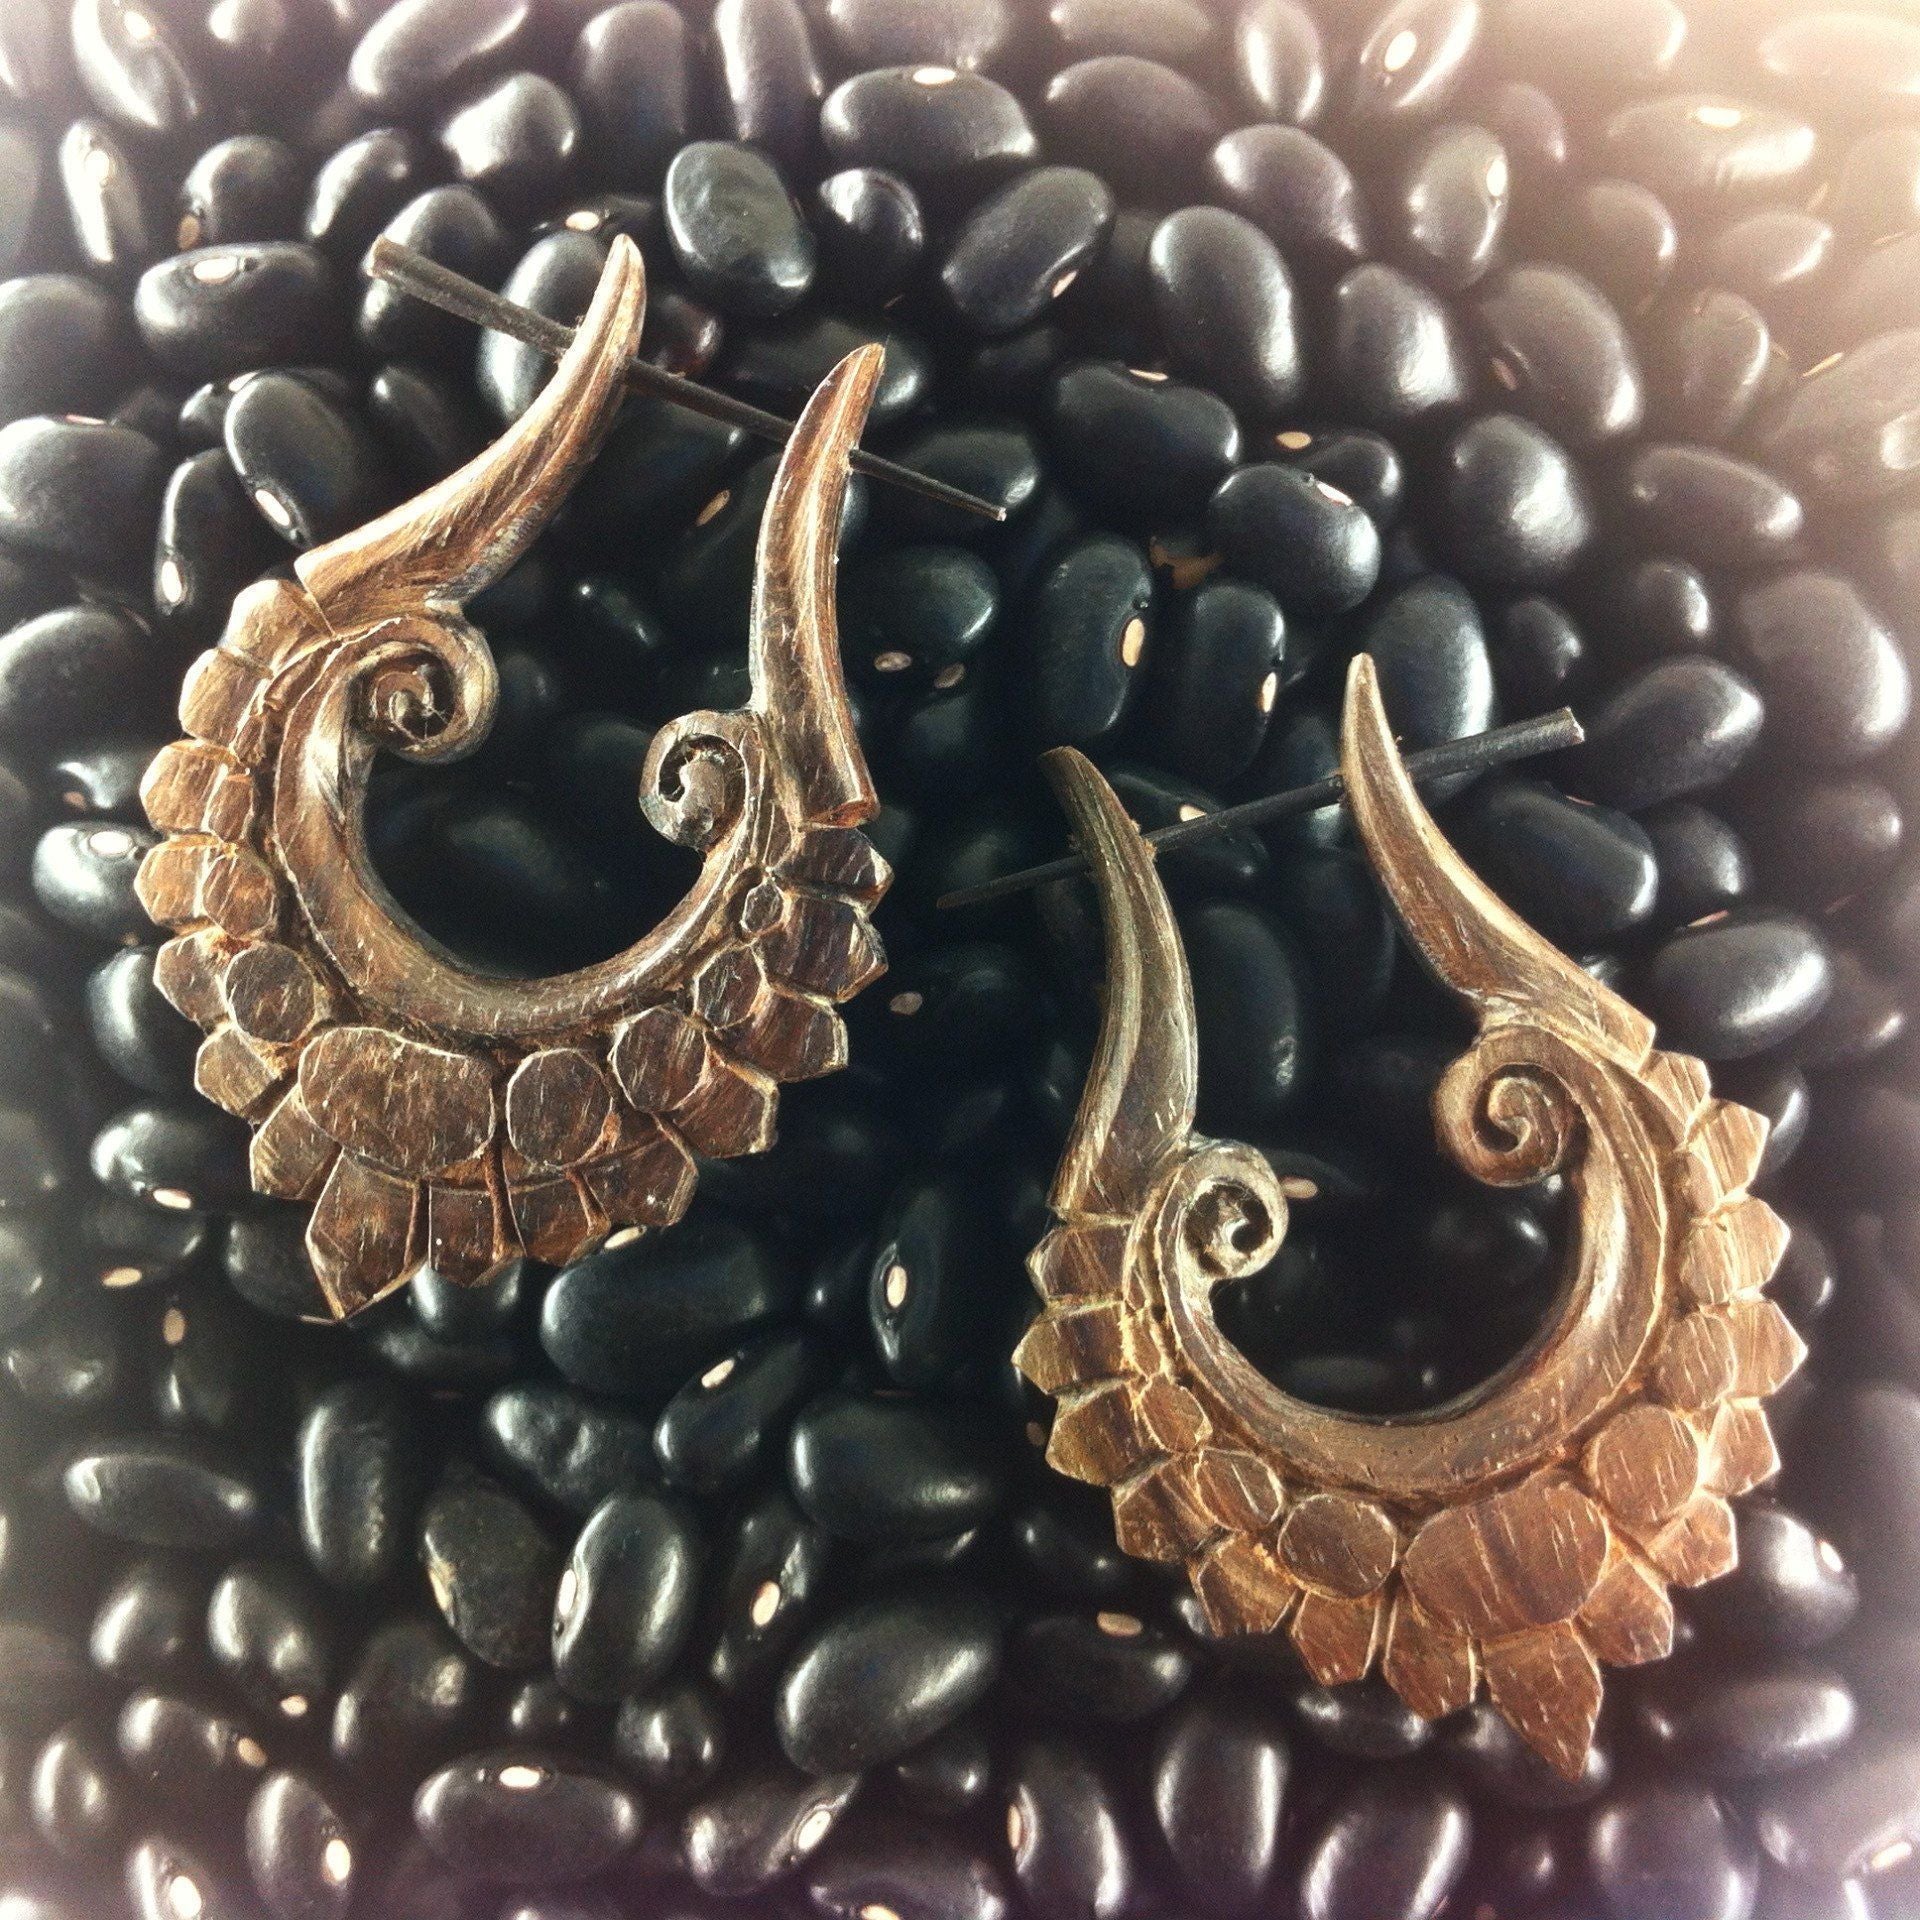 Natural Jewelry :|: Rome. Wood Earrings. Natural Rosewood, Handmade Jewelry. | Wood Earrings